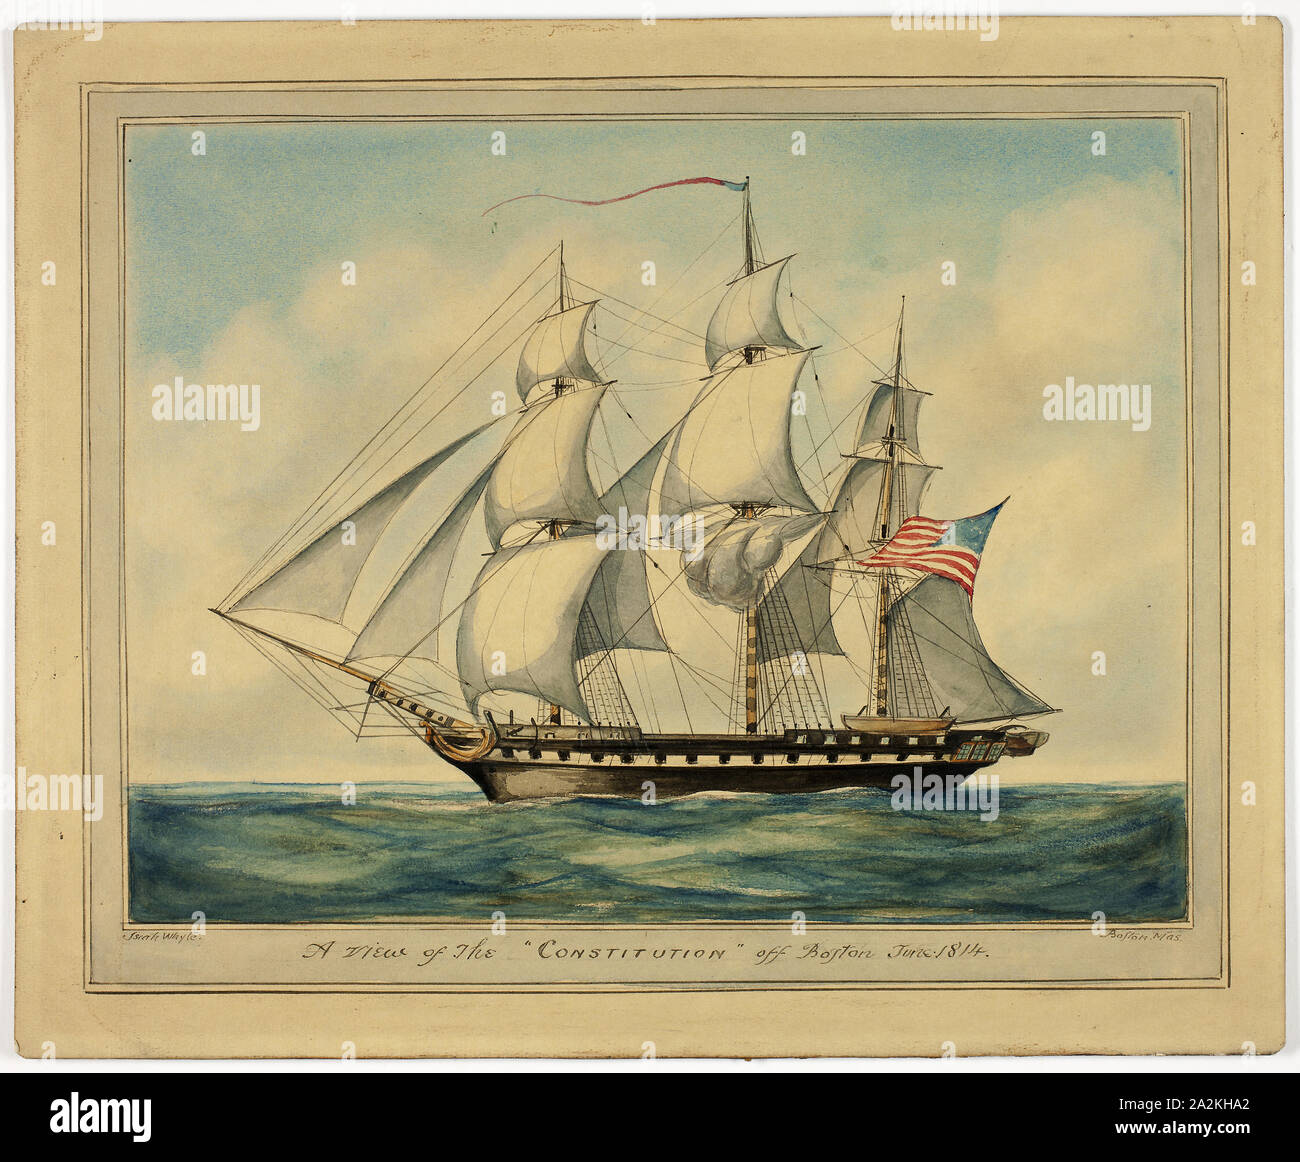 A View of the Constitution off Boston, 1814, Isiah Whyte, American, 19th century, United States, Watercolor with traces of graphite on tan laid paper, laid down on board, 285 x 350 mm Stock Photo